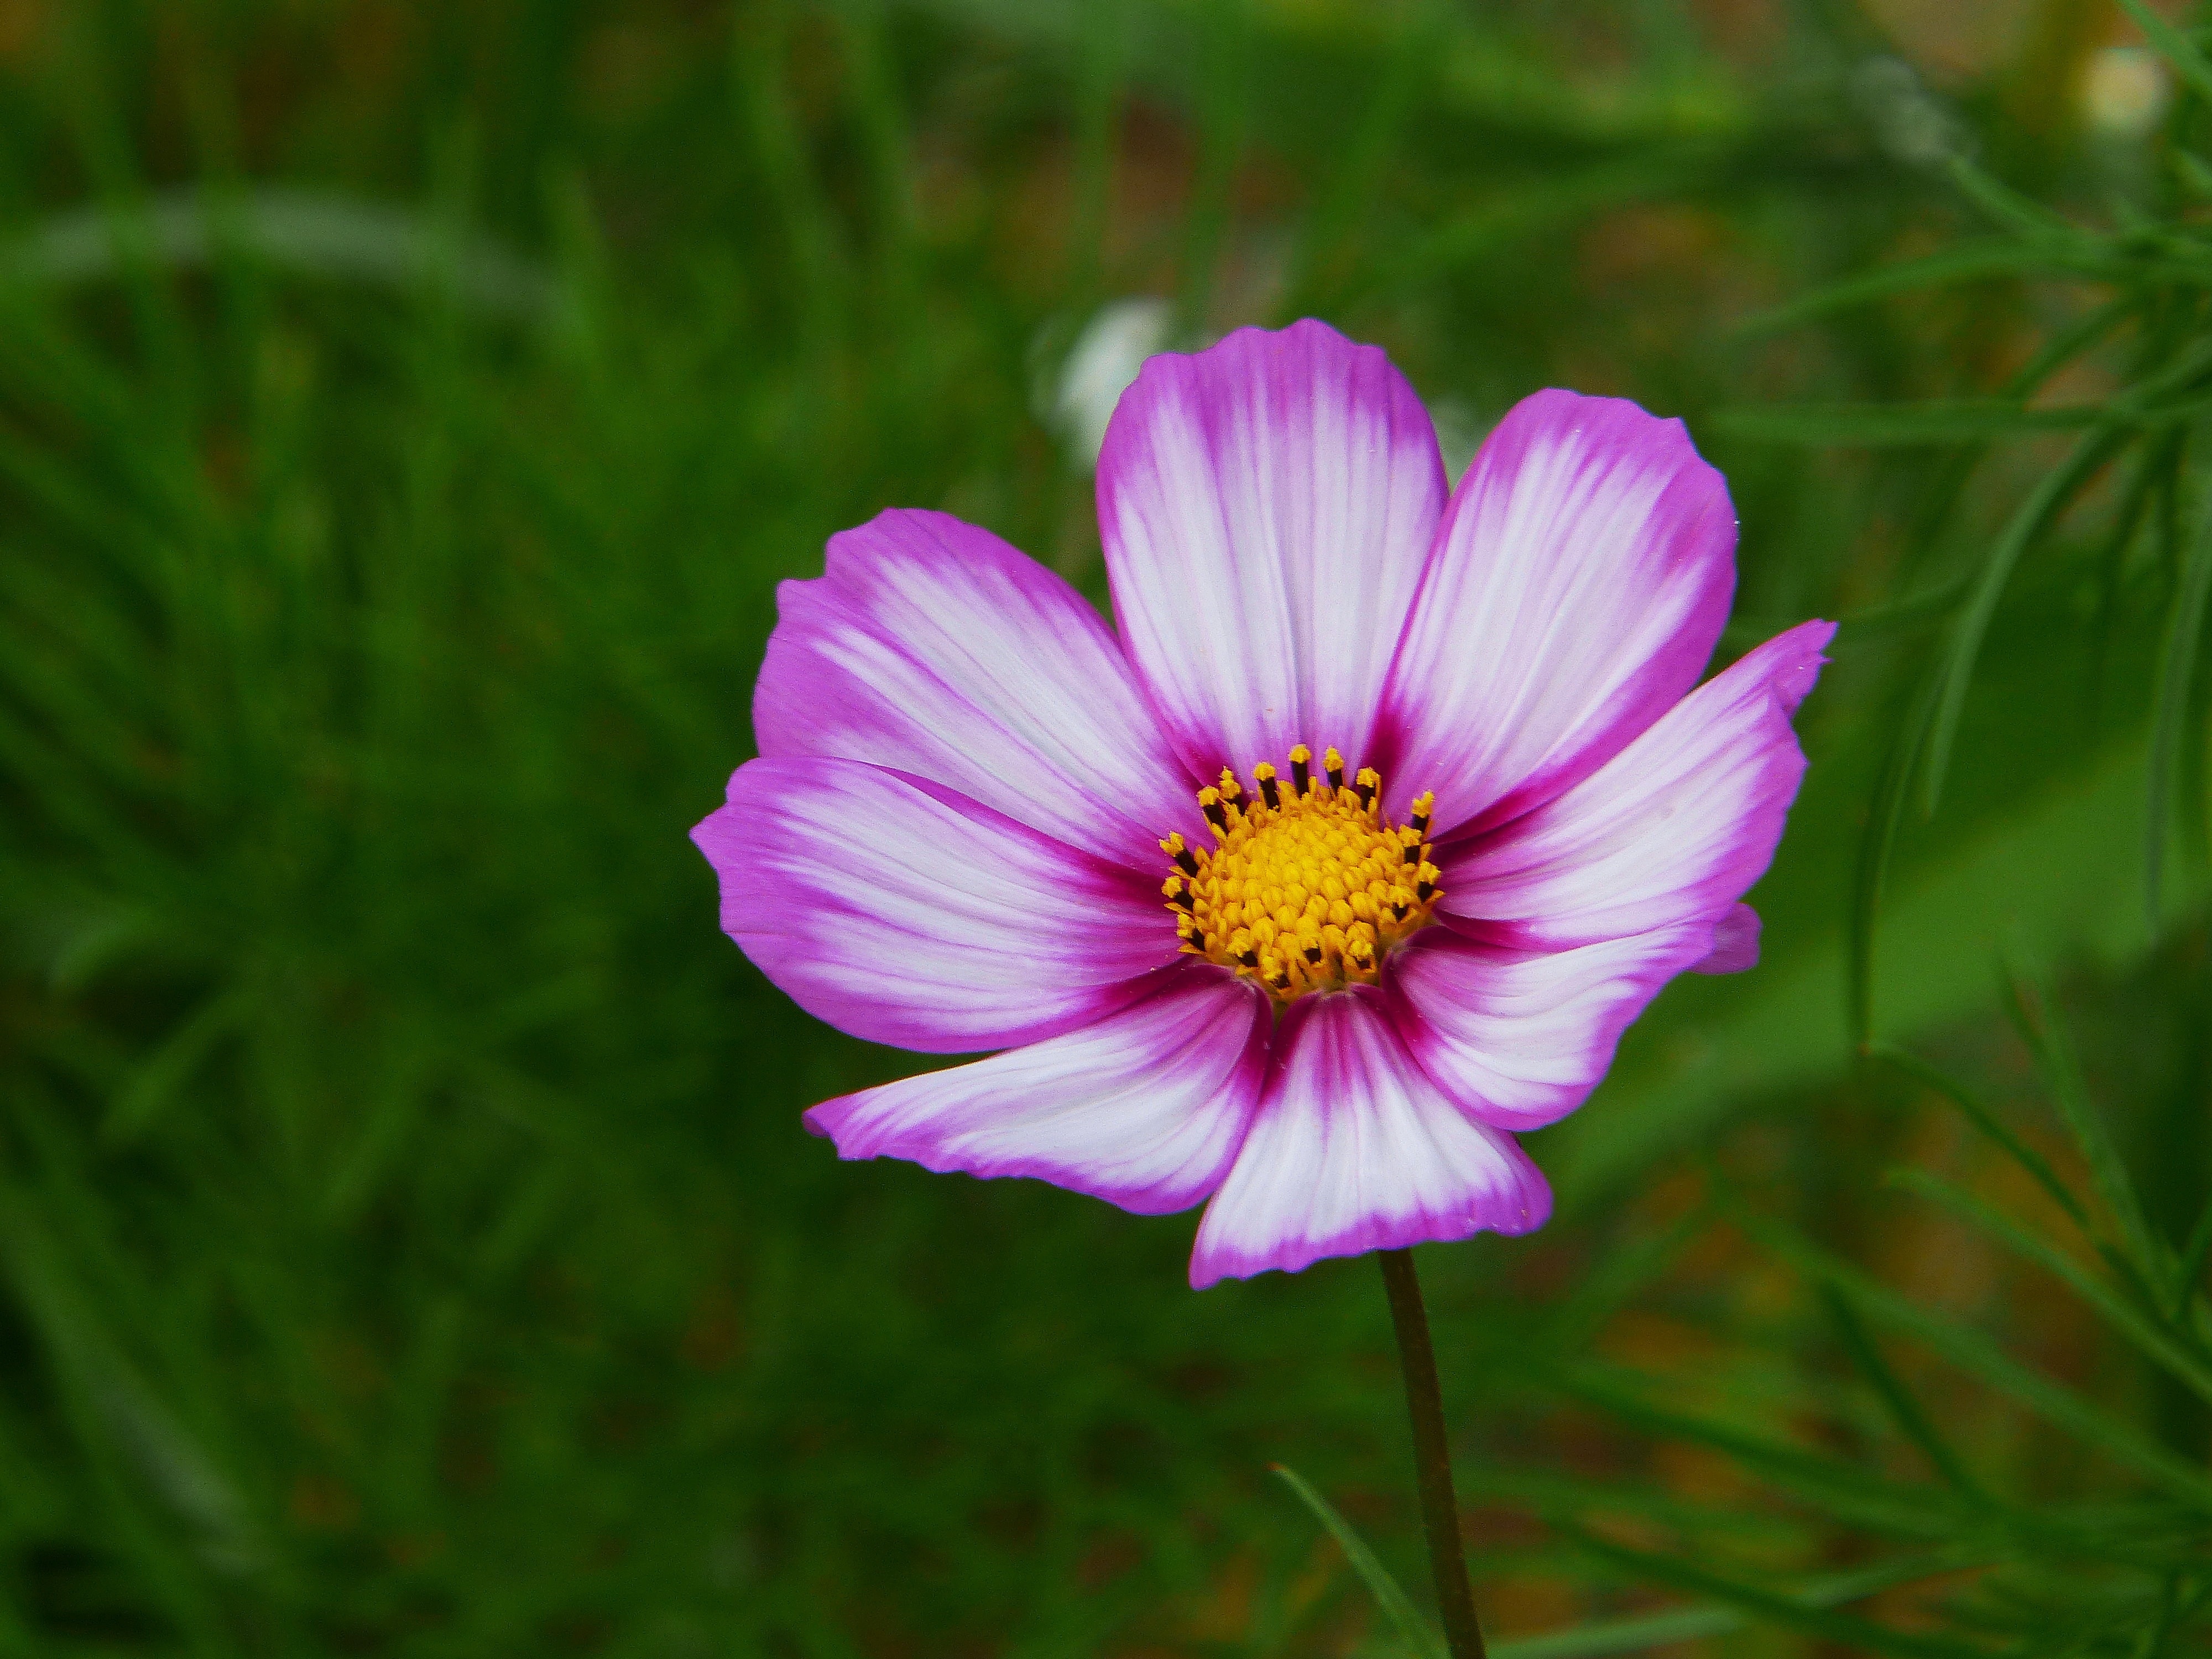 pink yellow and white 8 petaled flower